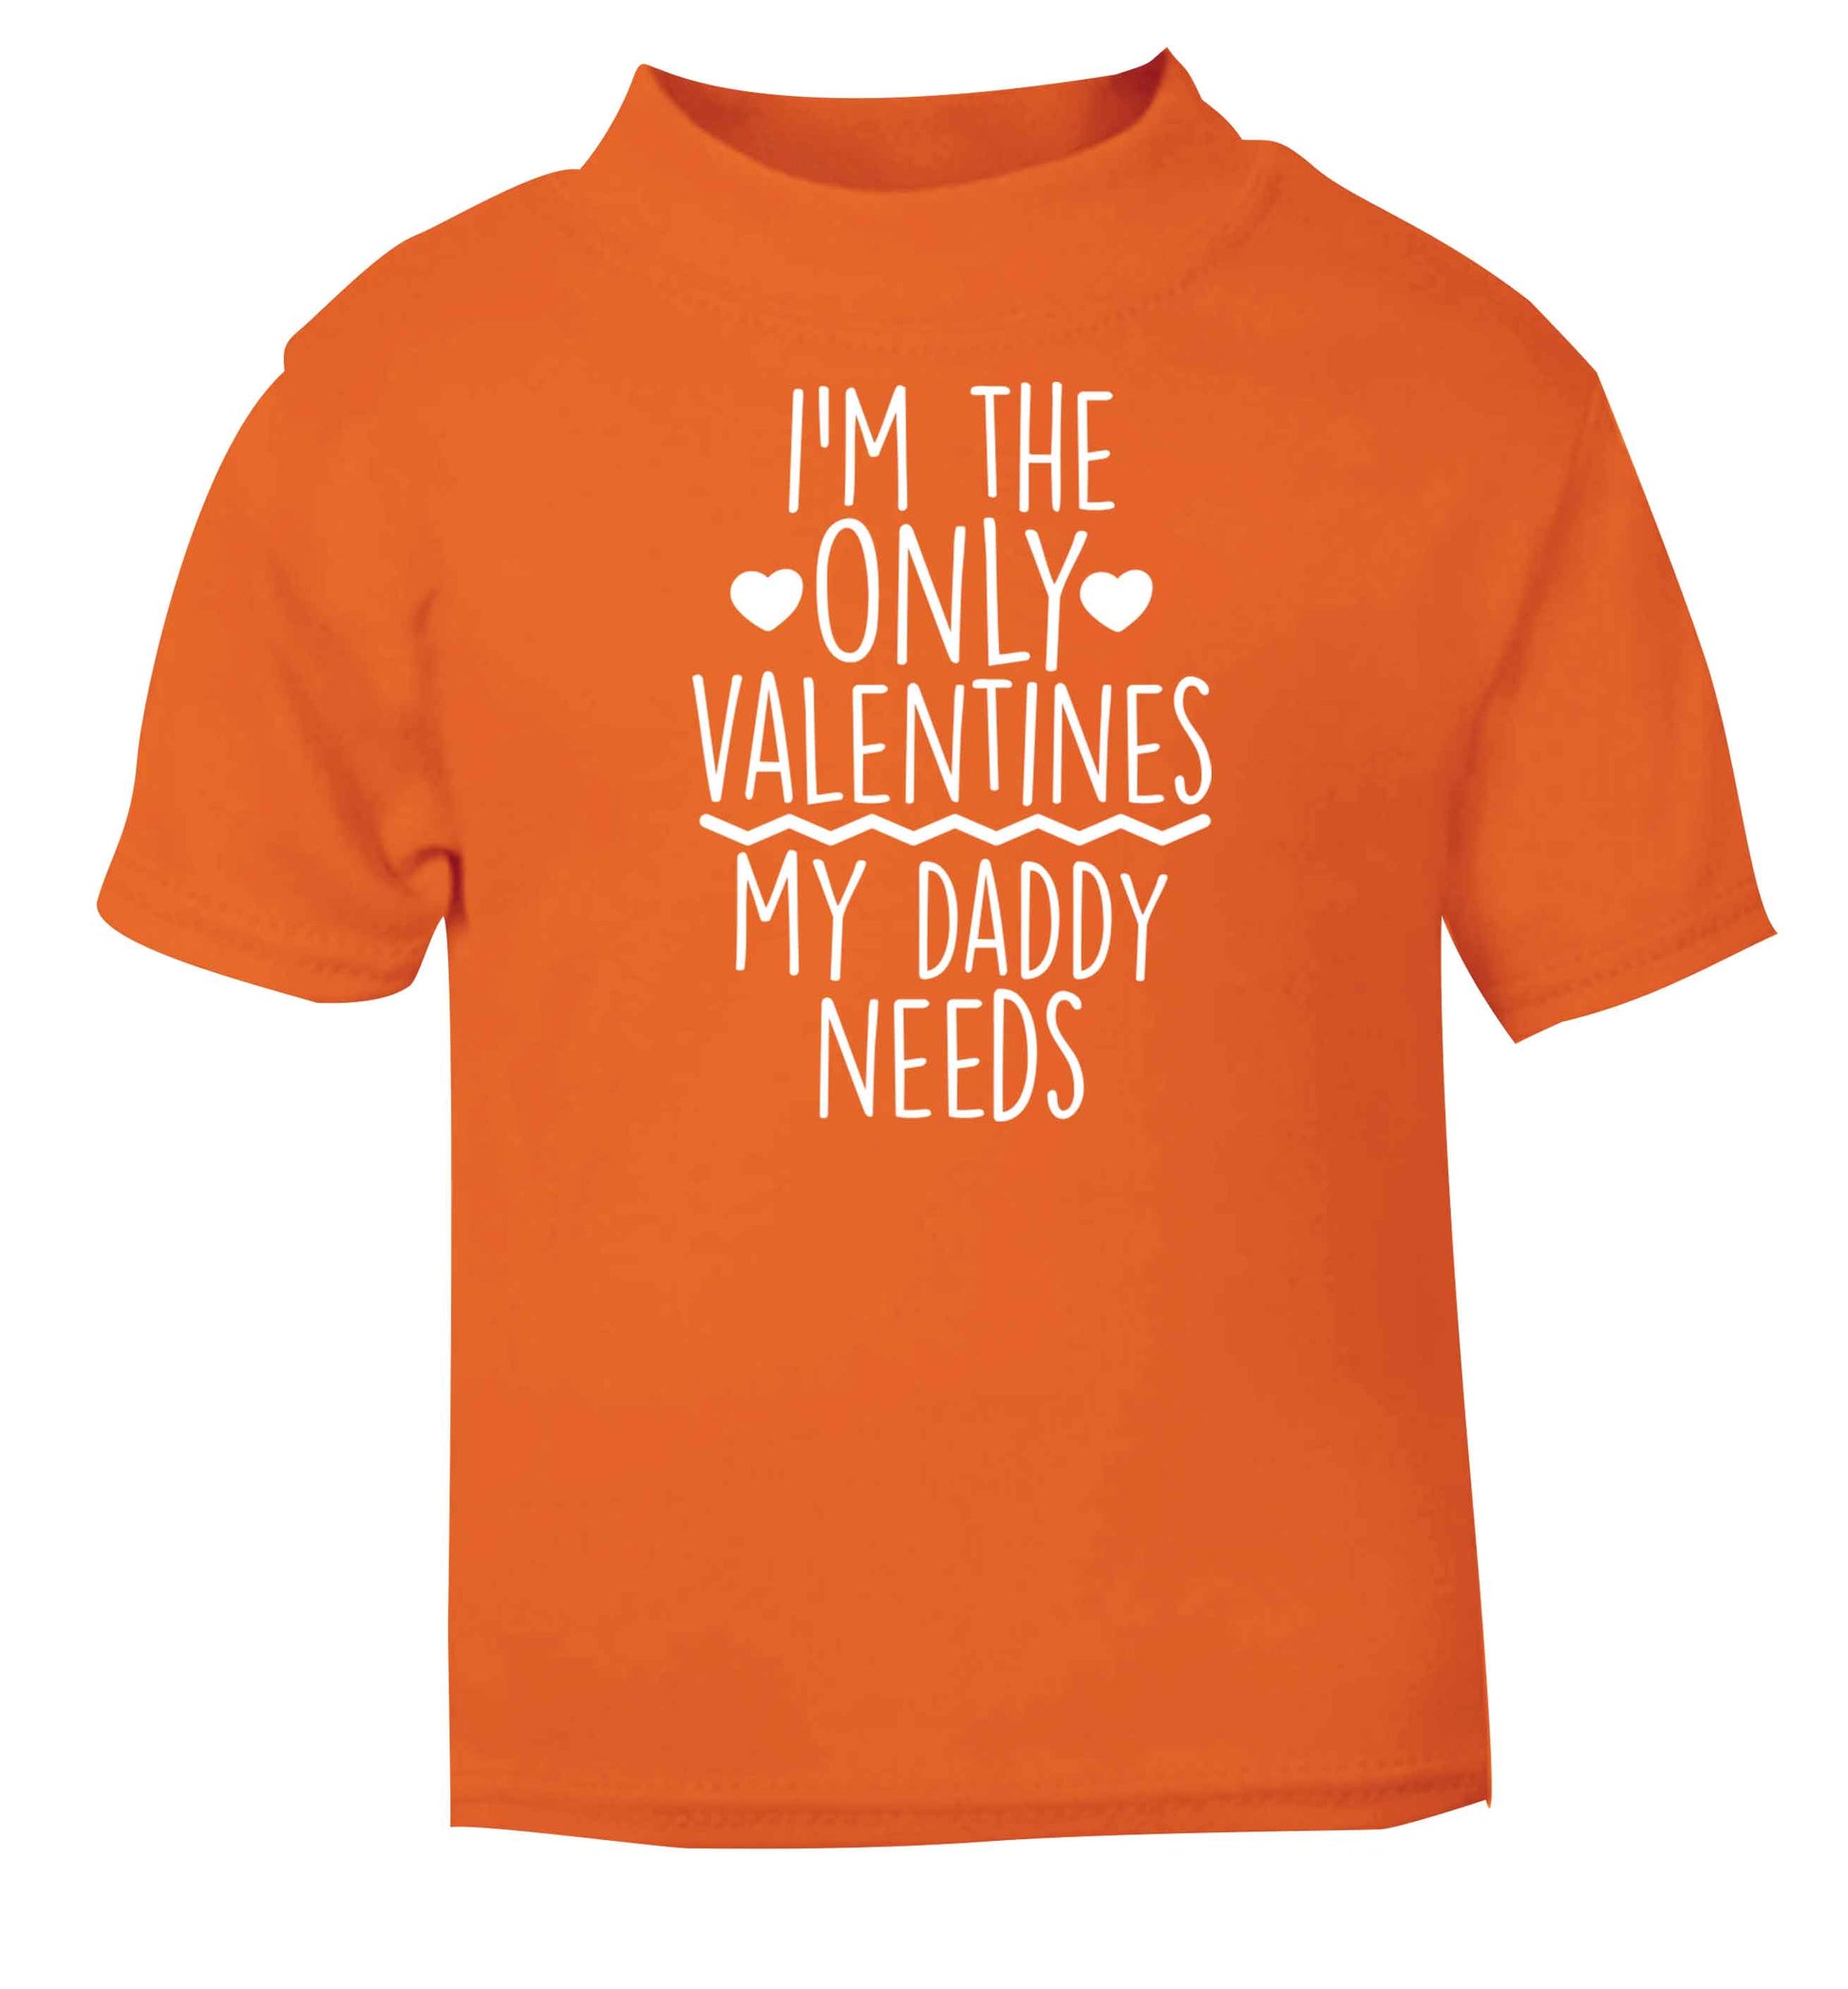 I'm the only valentines my daddy needs orange baby toddler Tshirt 2 Years